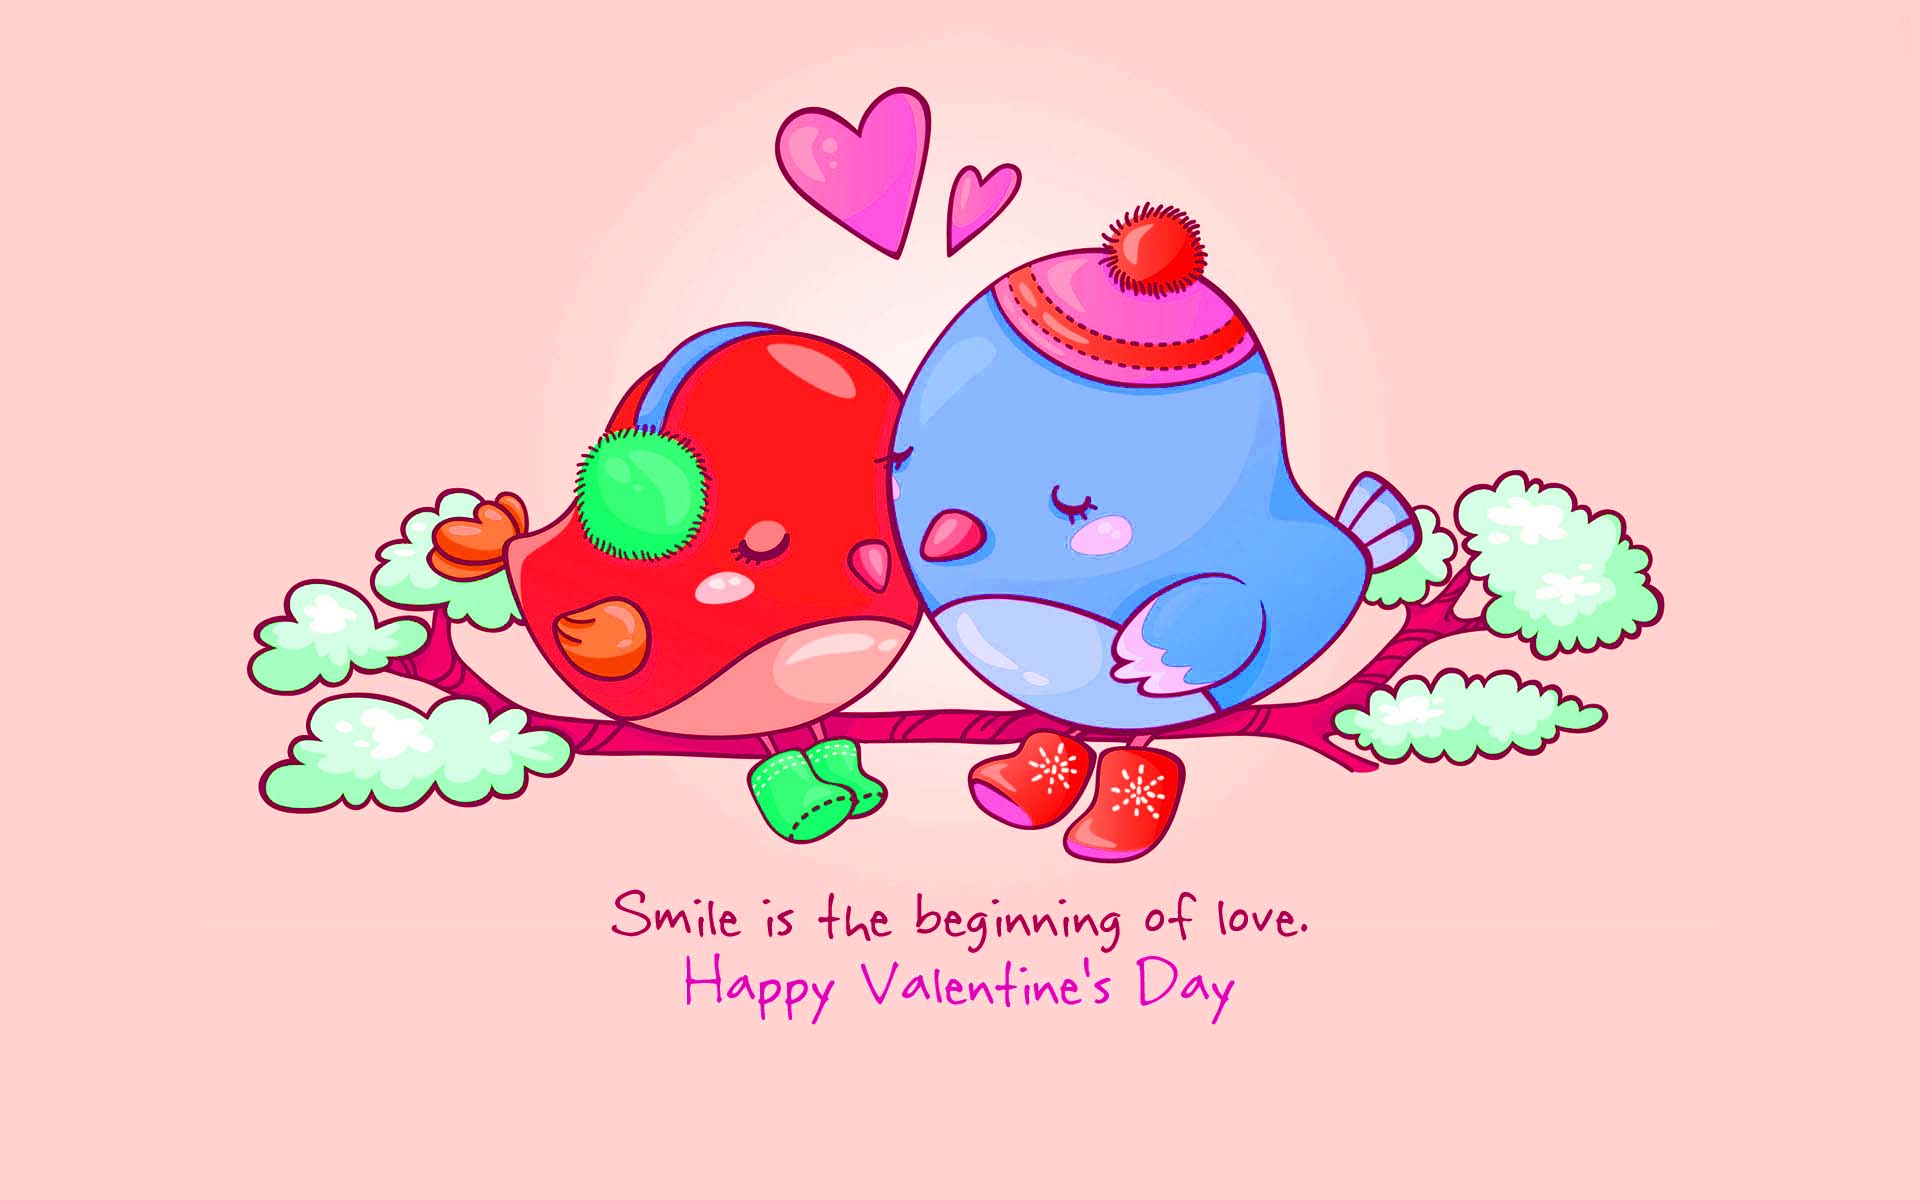 Valentines Day 2018 Love Cards Image Picture & Wallpaper